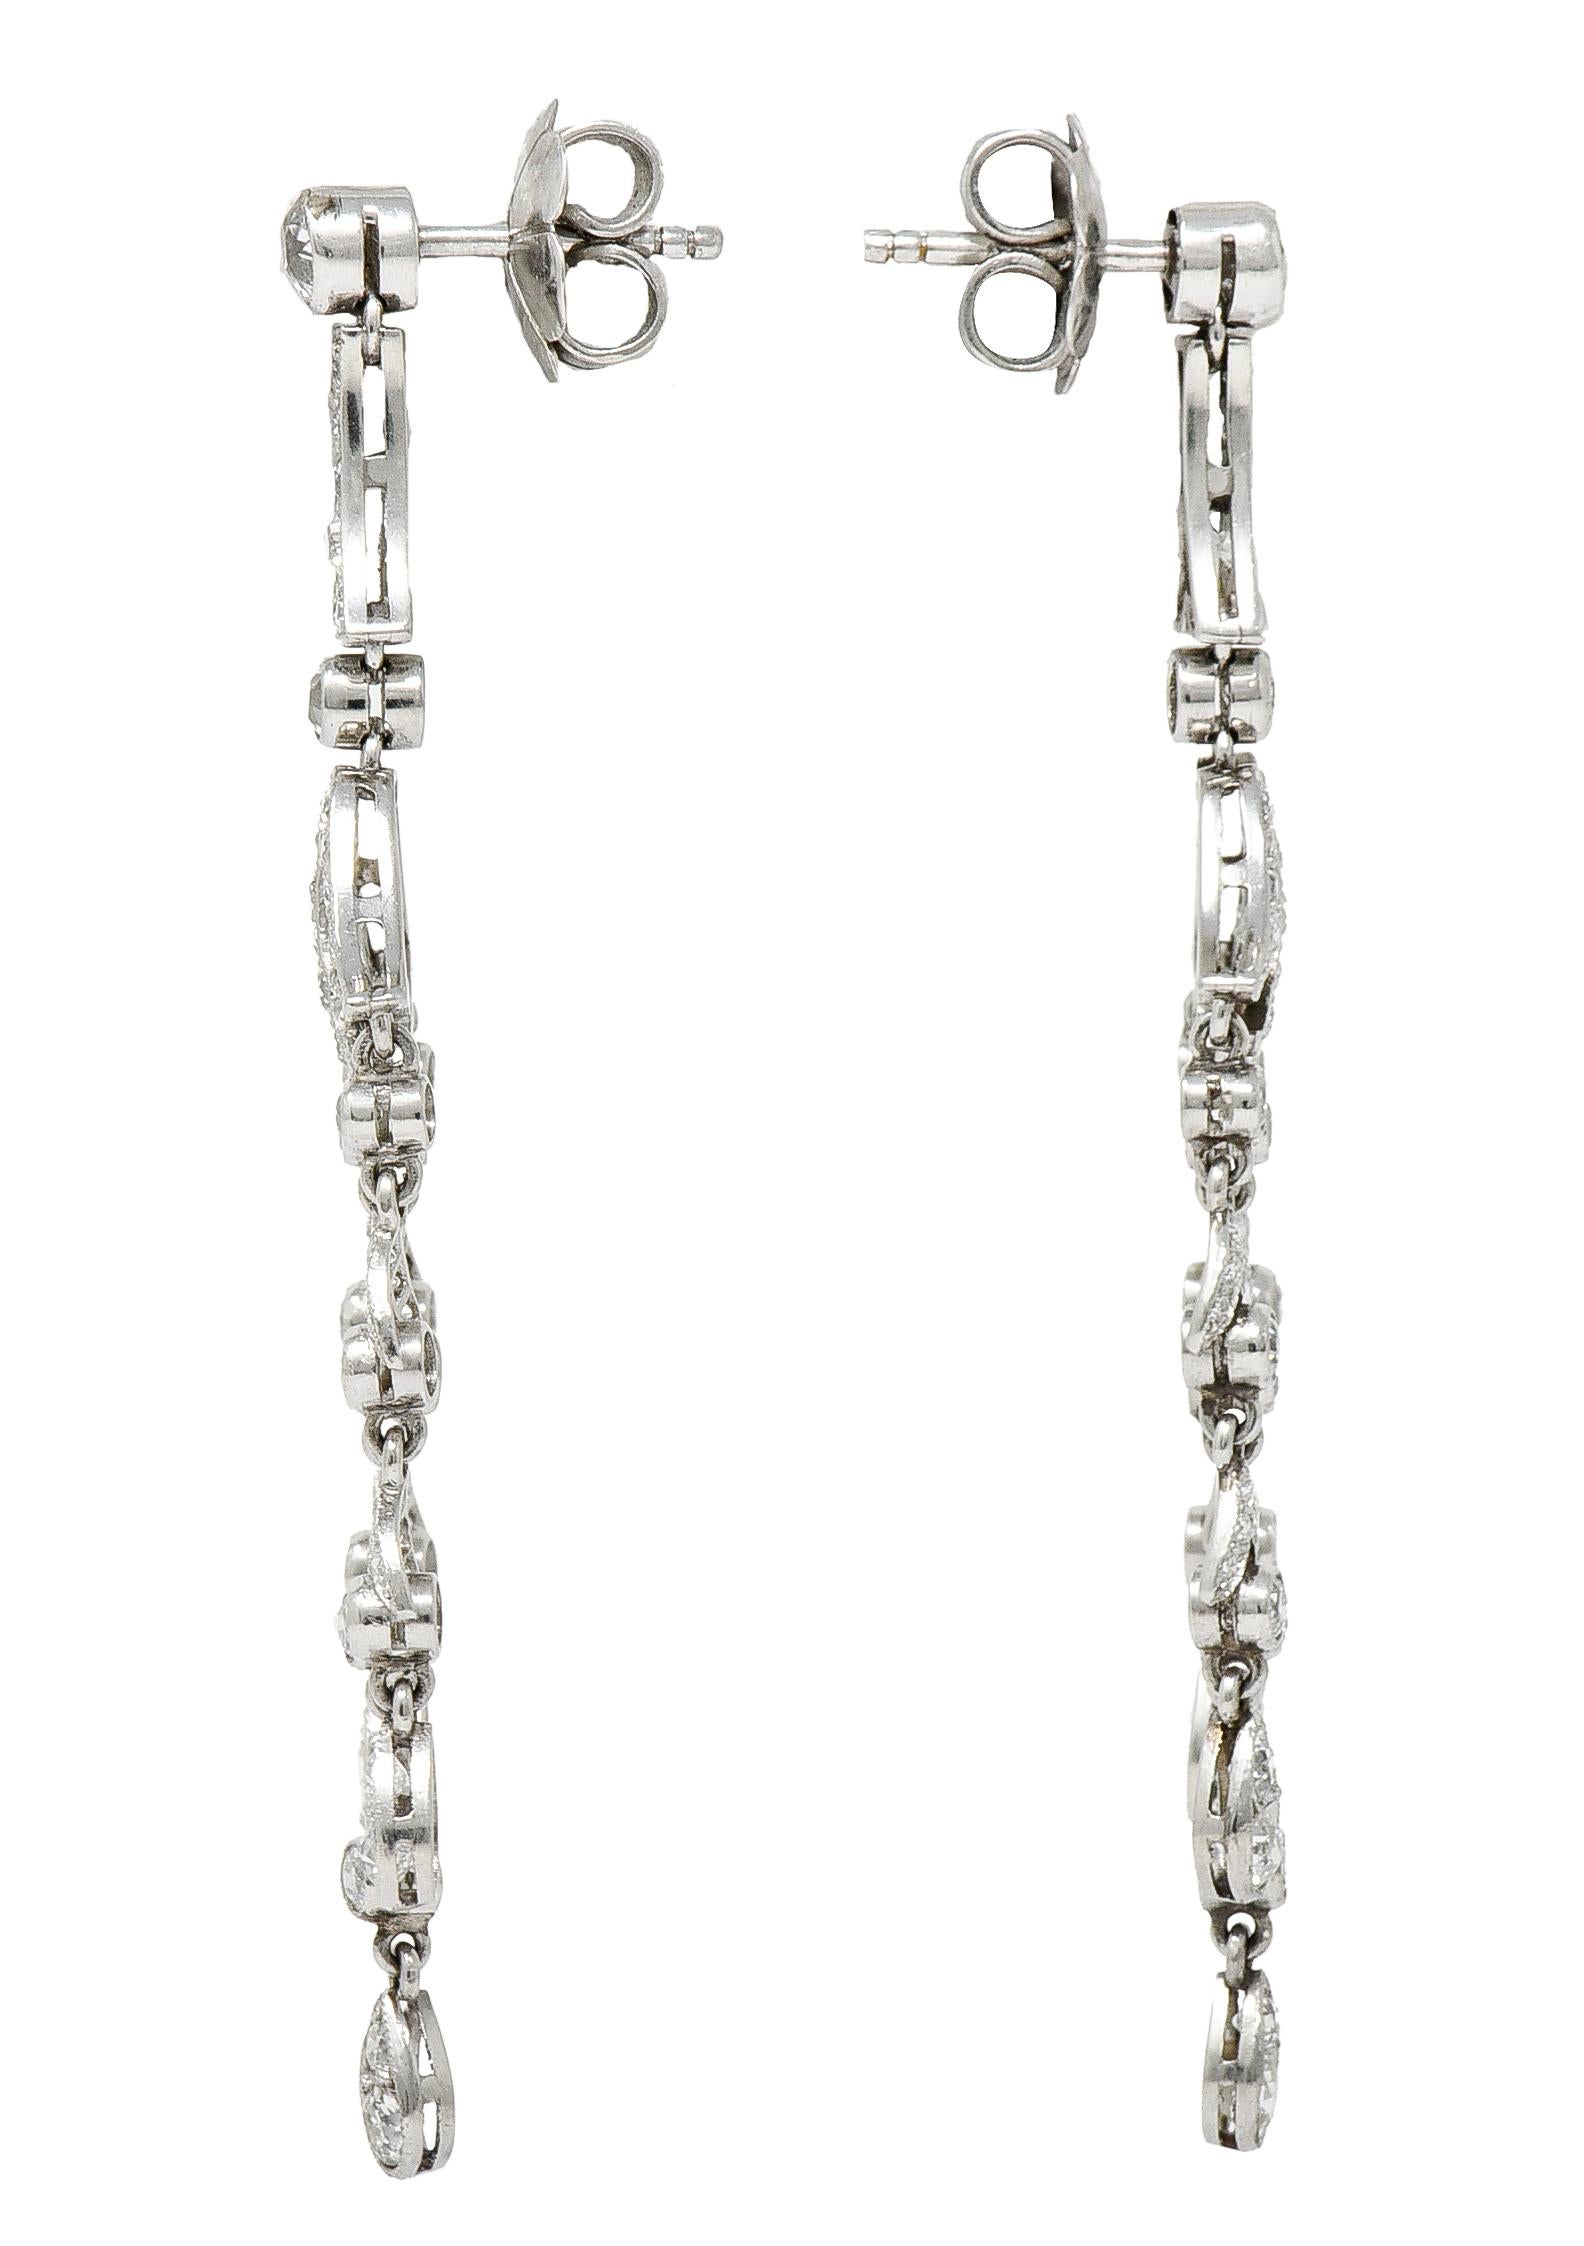 Chandelier style earrings have diamond stud surmounts. Suspending a bar link that extends into a flourished foliate motif. With three articulated tendrils of bezel set diamond links alternating with diamond accented foliate. Total diamond weight is